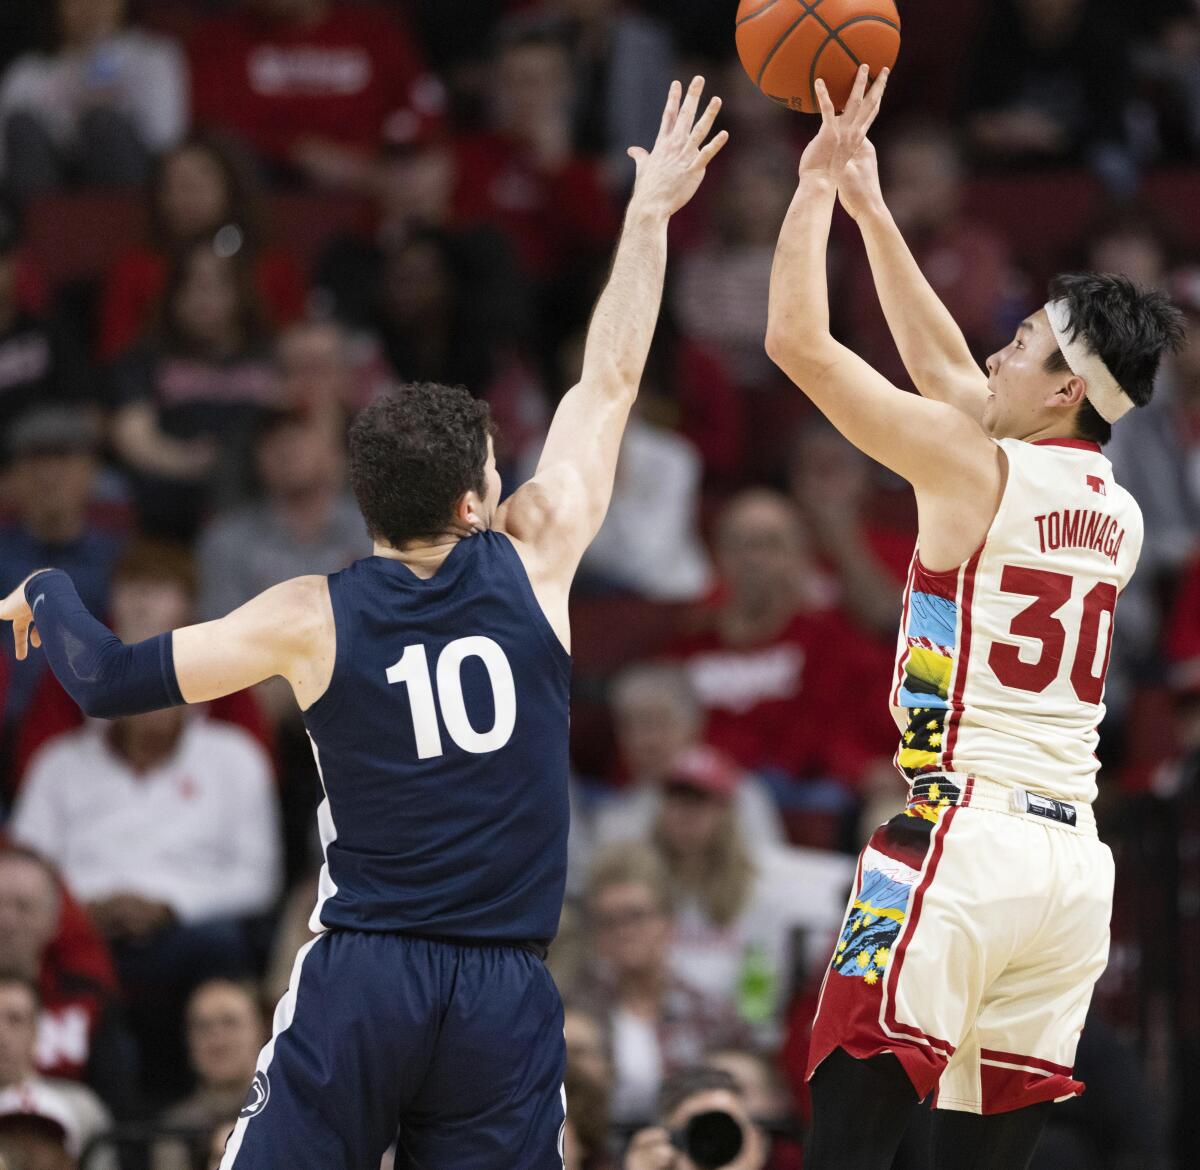 Nebraska's Keisei Tominaga (30) shoots a 3-point basket against Penn State's Andrew Funk (10) during the second half of an NCAA college basketball game Sunday, Feb. 5, 2023, in Lincoln, Neb. (AP Photo/Rebecca S. Gratz)